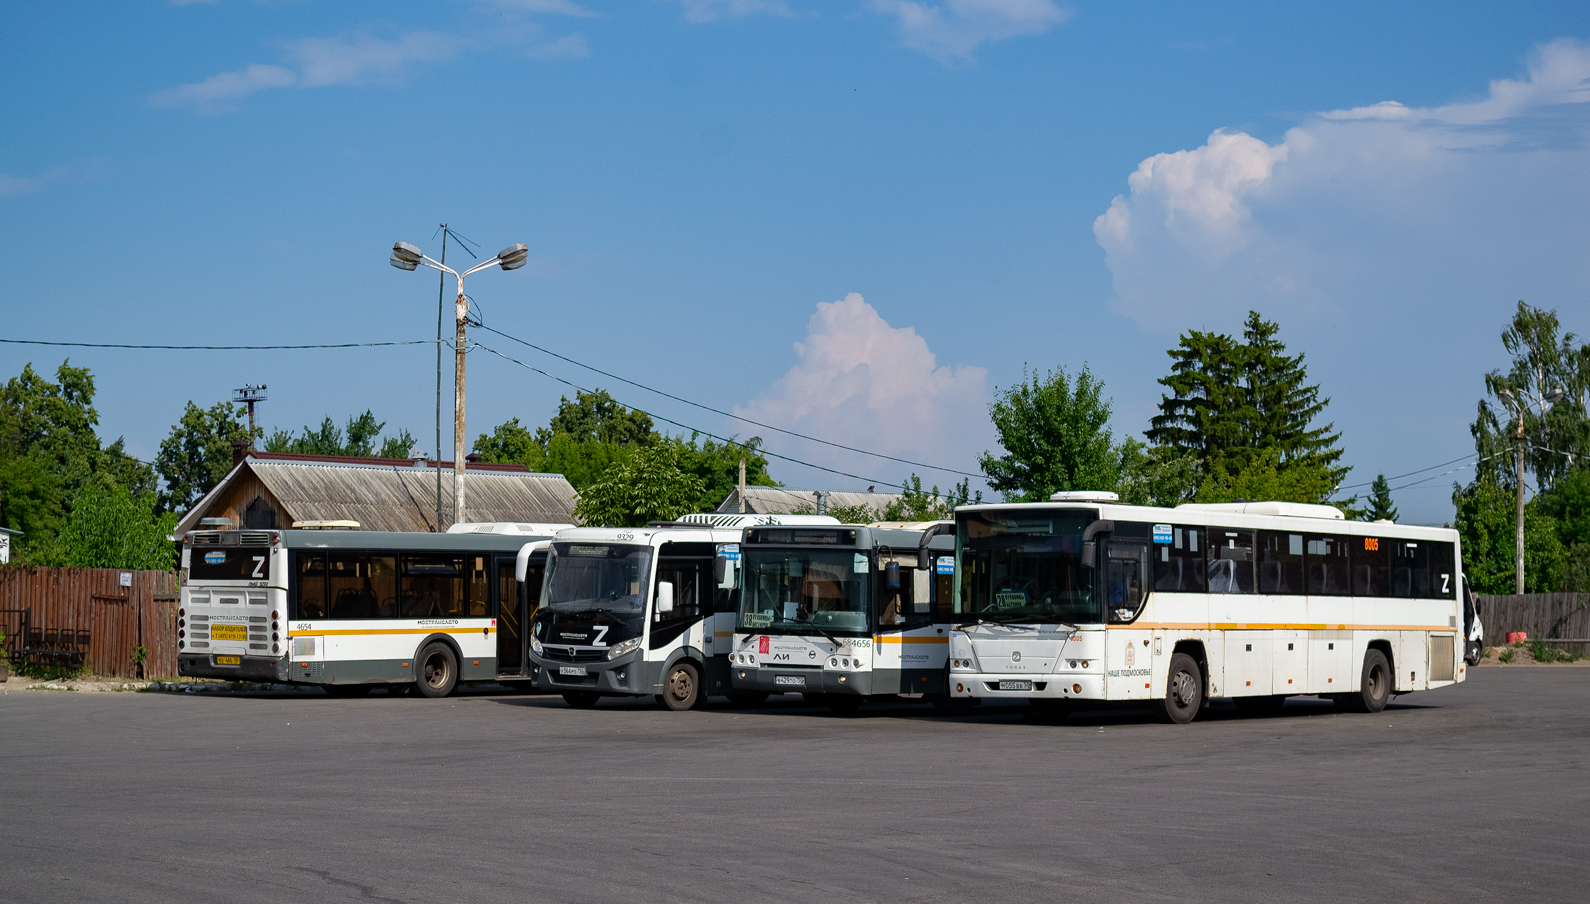 Moskauer Gebiet, GolAZ-525110-10 "Voyage" Nr. 027712; Moskauer Gebiet — Bus stations, terminal stations and stops